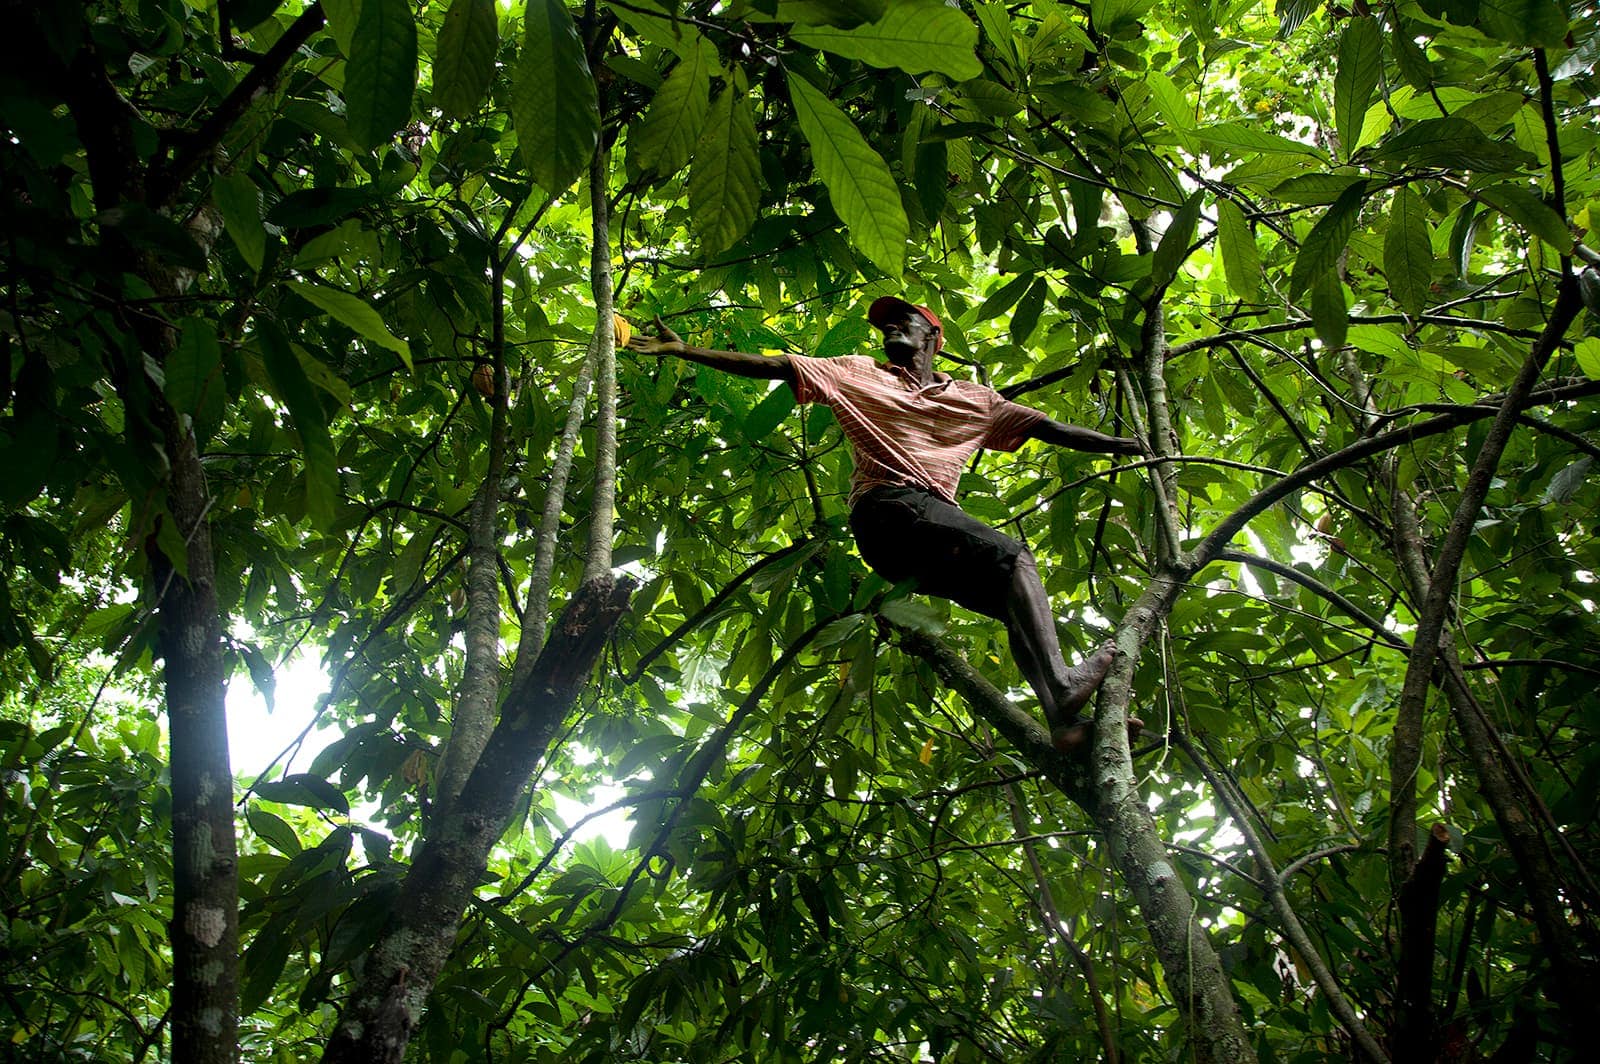 A man climbing a tree and reaching for a cacao pod.